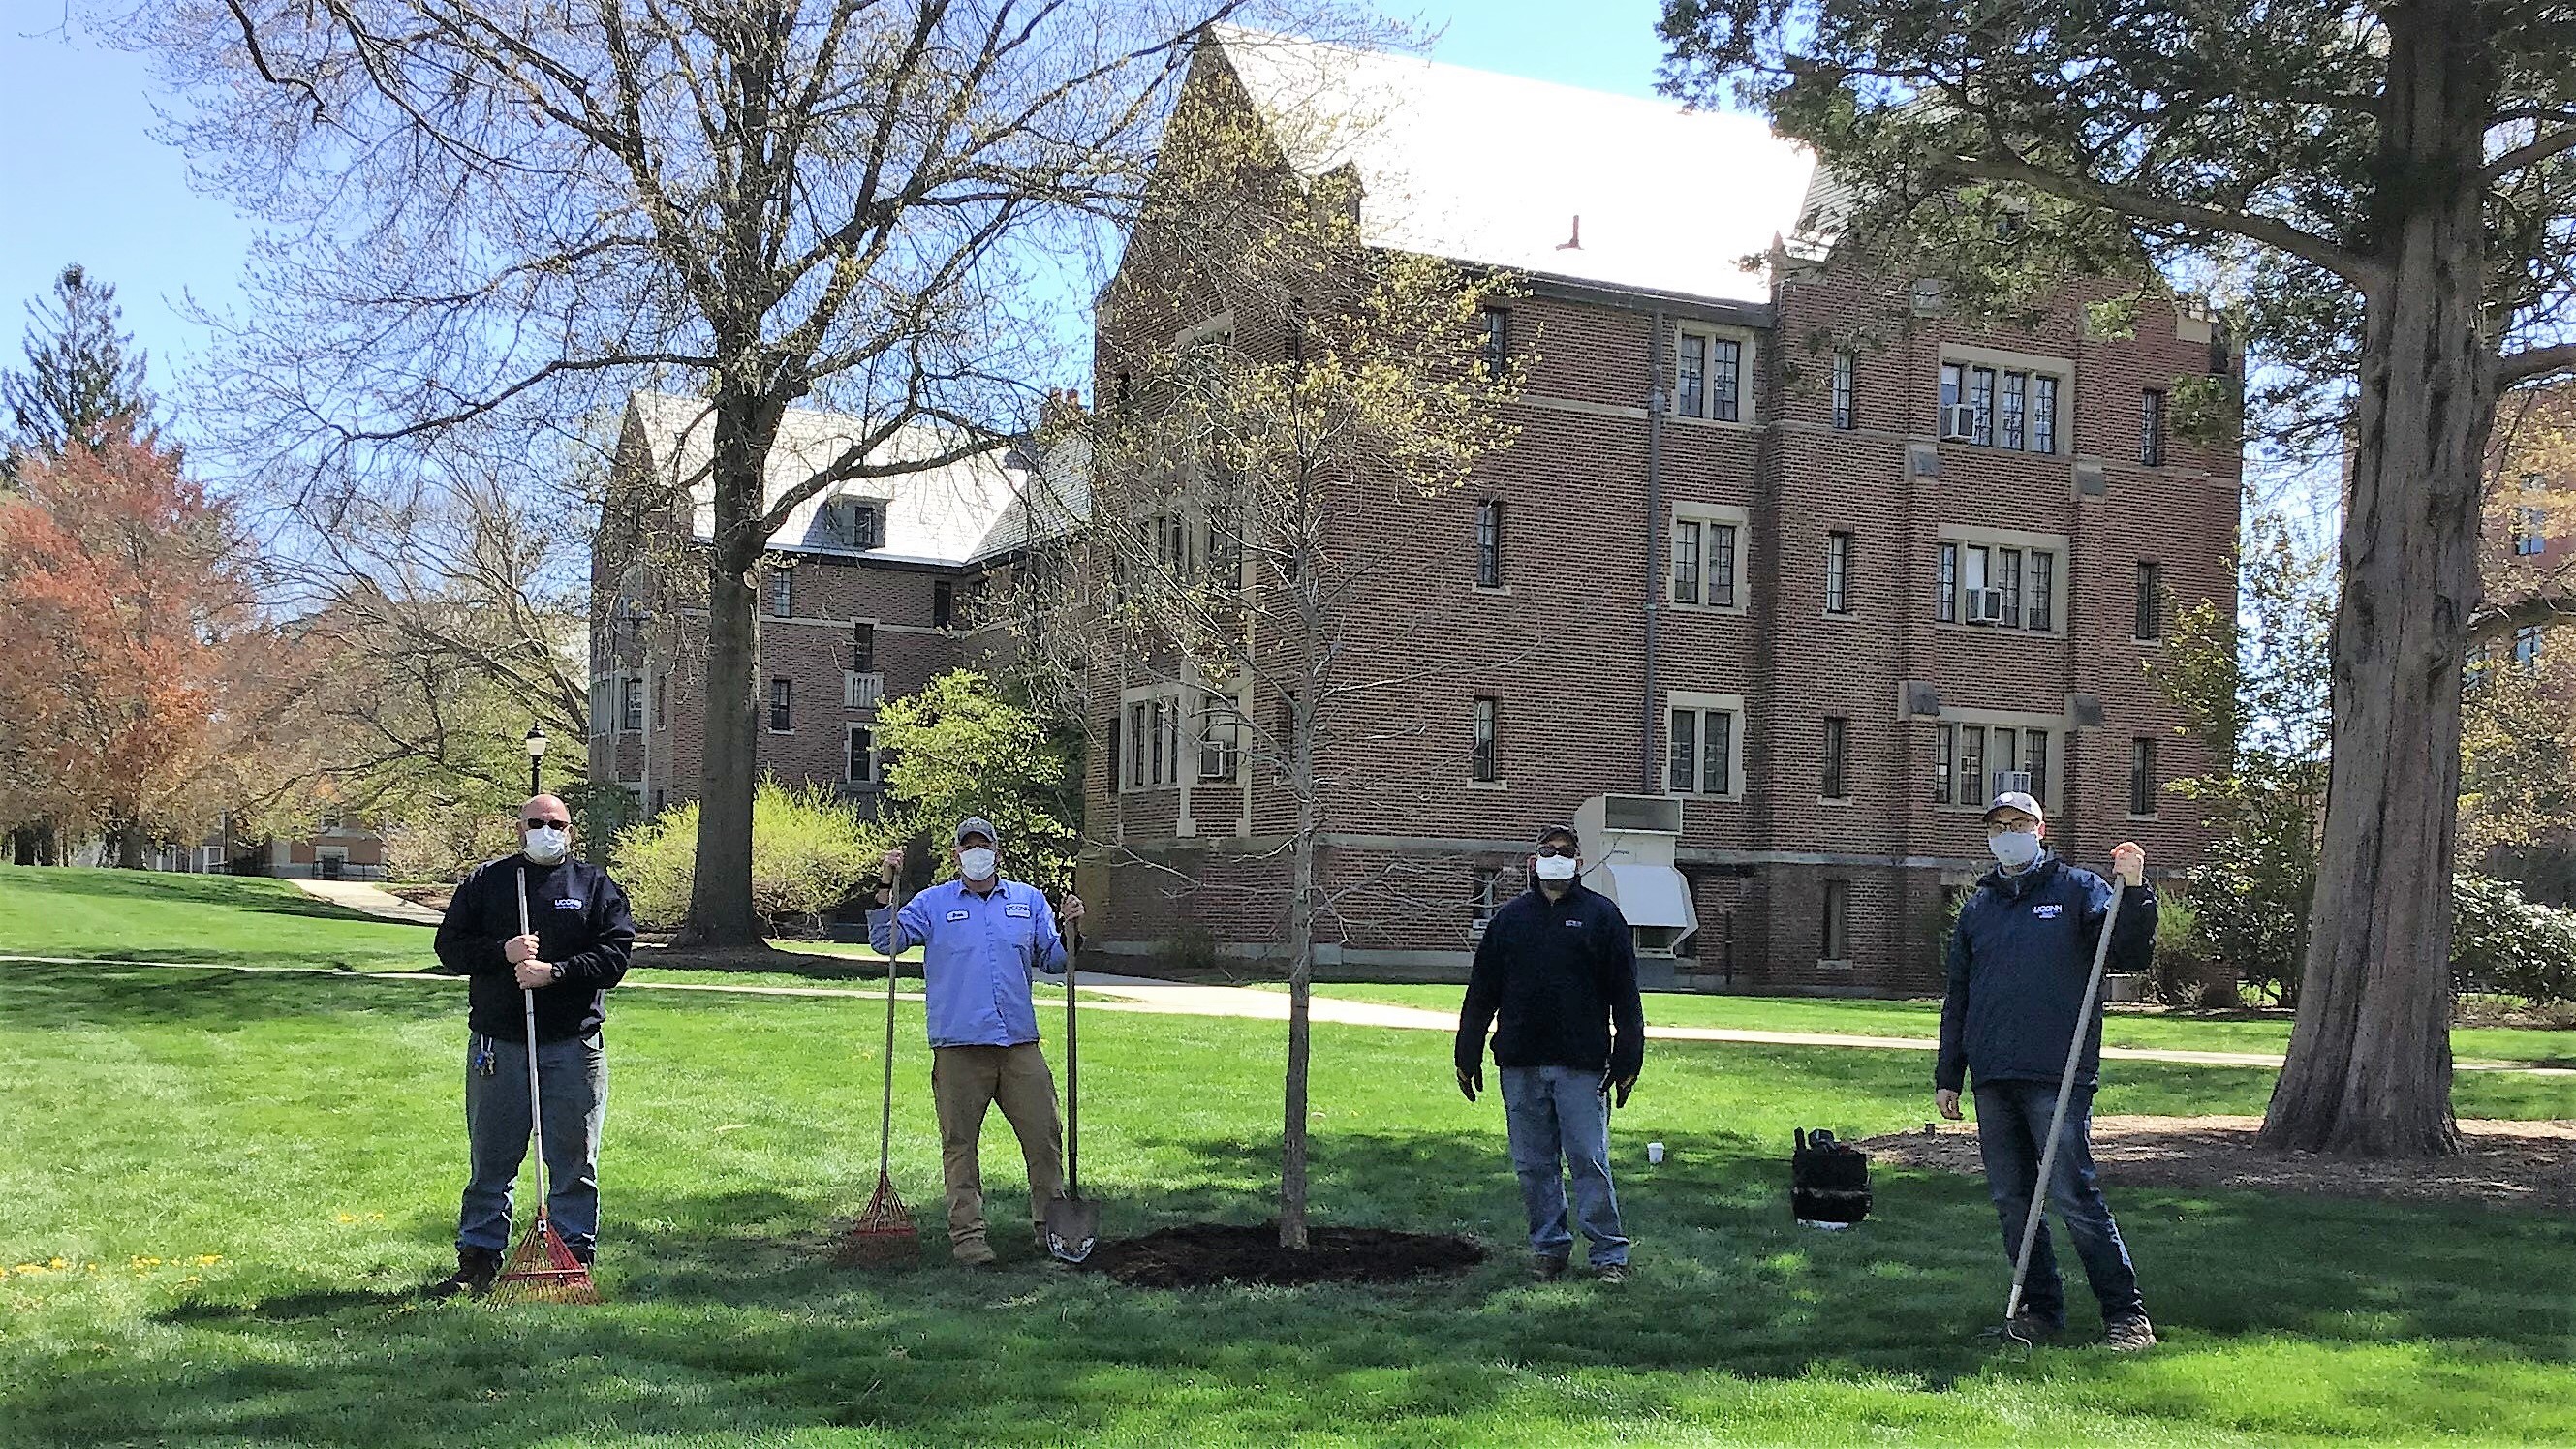 From left to rigth, Mike Kovach (landscape supervisor), Brian Murray (arborist), William Bates (arborist), and Patrick McKee (UConn Office of Sustainability) plant the Class of 2020 tree, an oak.